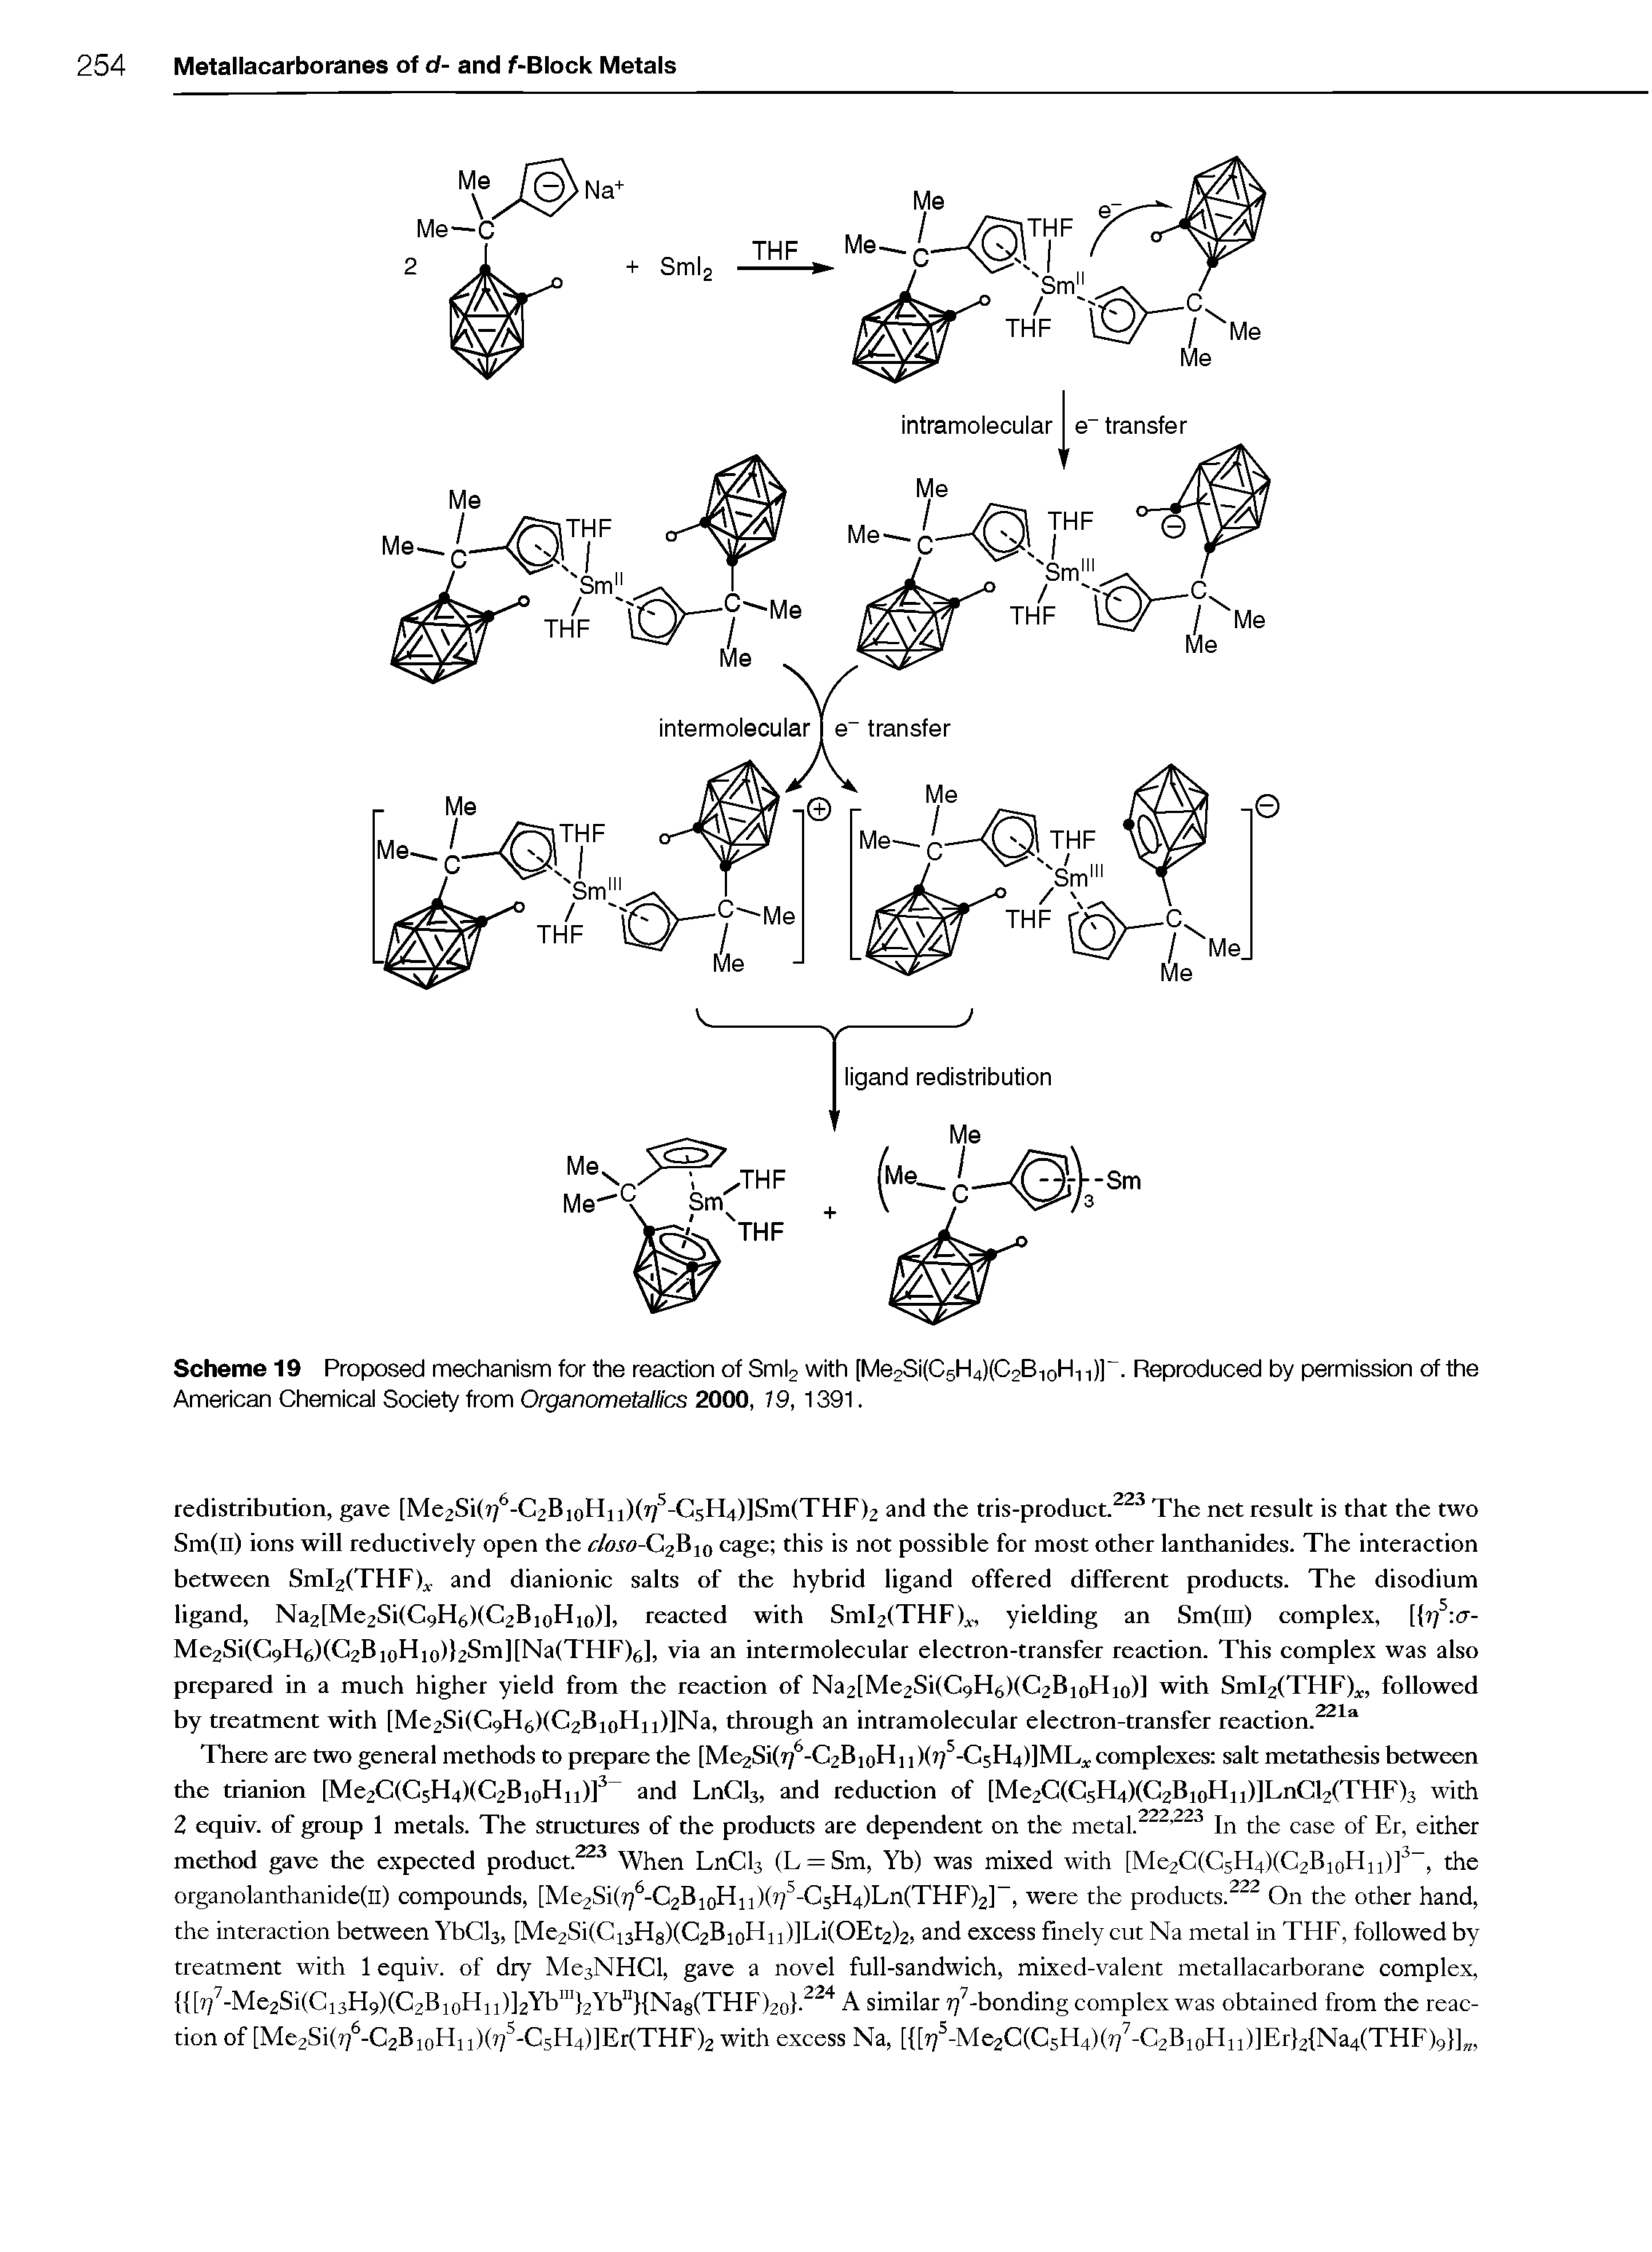 Scheme 19 Proposed mechanism for the reaction of Sml2 with [Me2Si(C5H4)(C2BioHii)]. Reproduced by permission of the American Chemical Society from Organometallics 2000, 79, 1391.